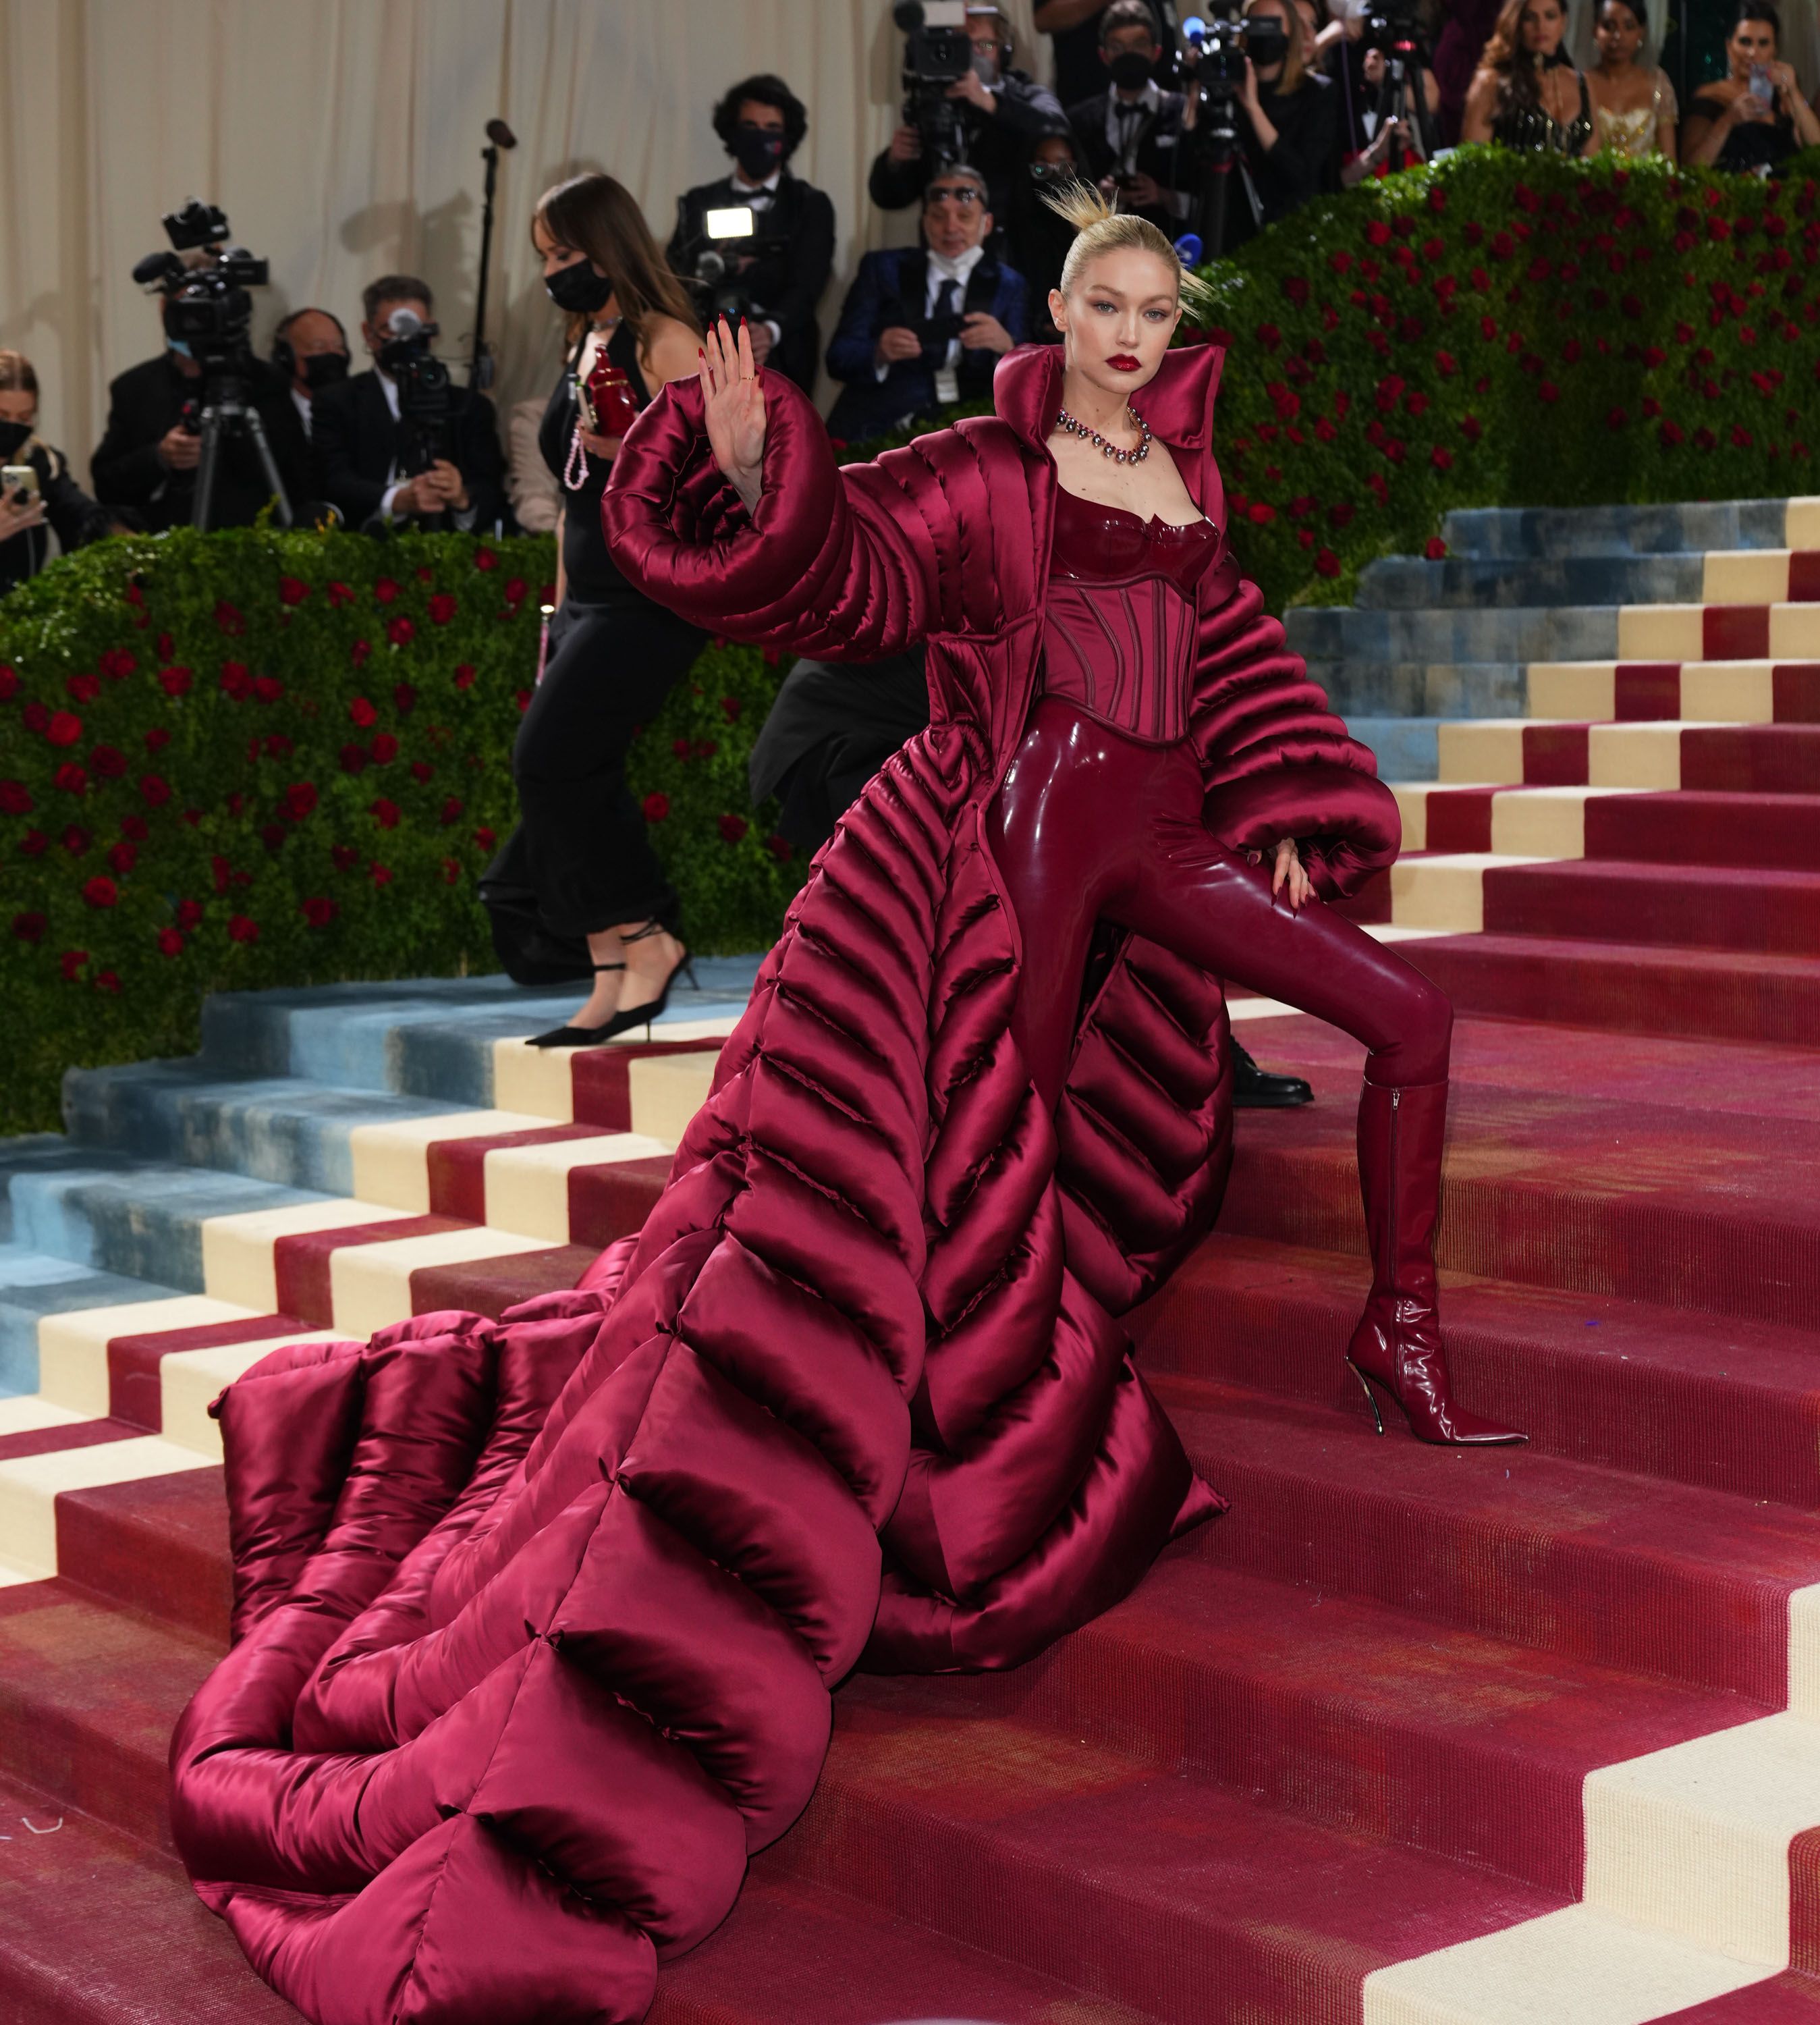 The 101 Best Met Gala Looks of All Time